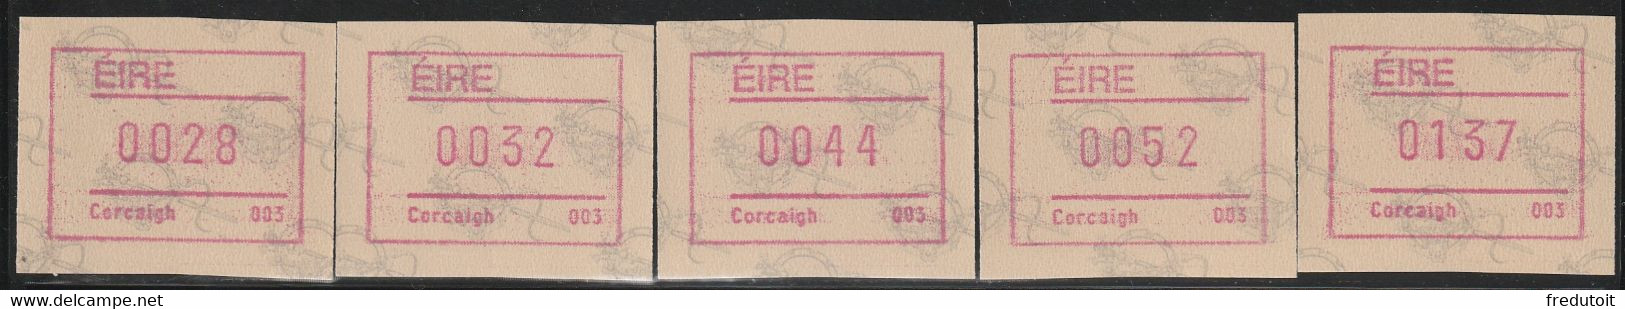 IRLANDE - Timbres Distributeurs / FRAMA  ATM - N°4** (1992) Corcaigh 003 - Franking Labels